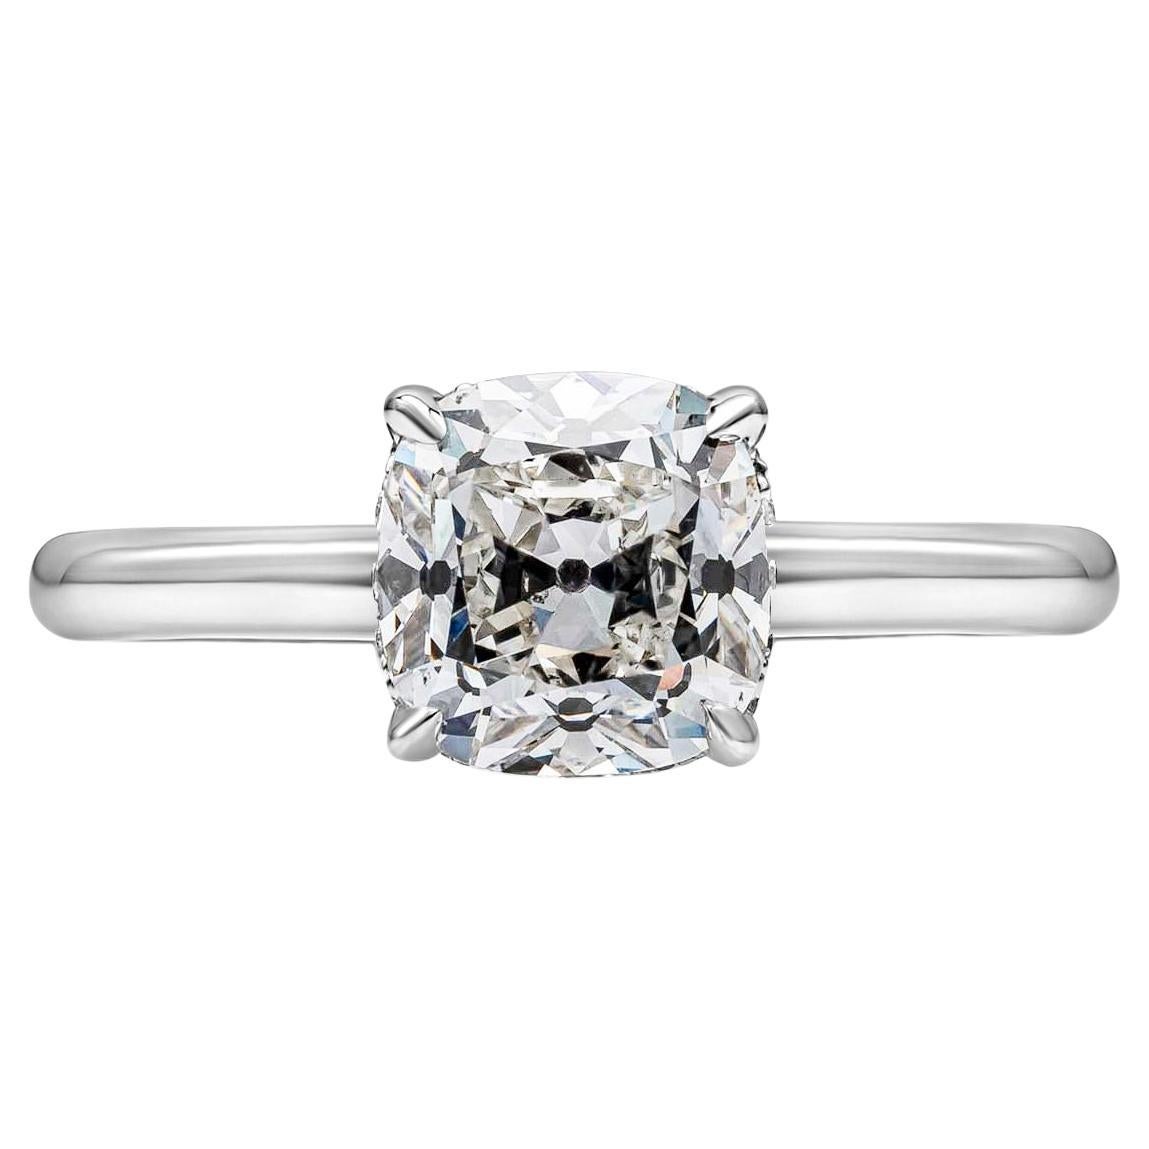 GIA Certified 1.72 Carats Antique Cushion Cut Diamond Solitaire Engagement Ring